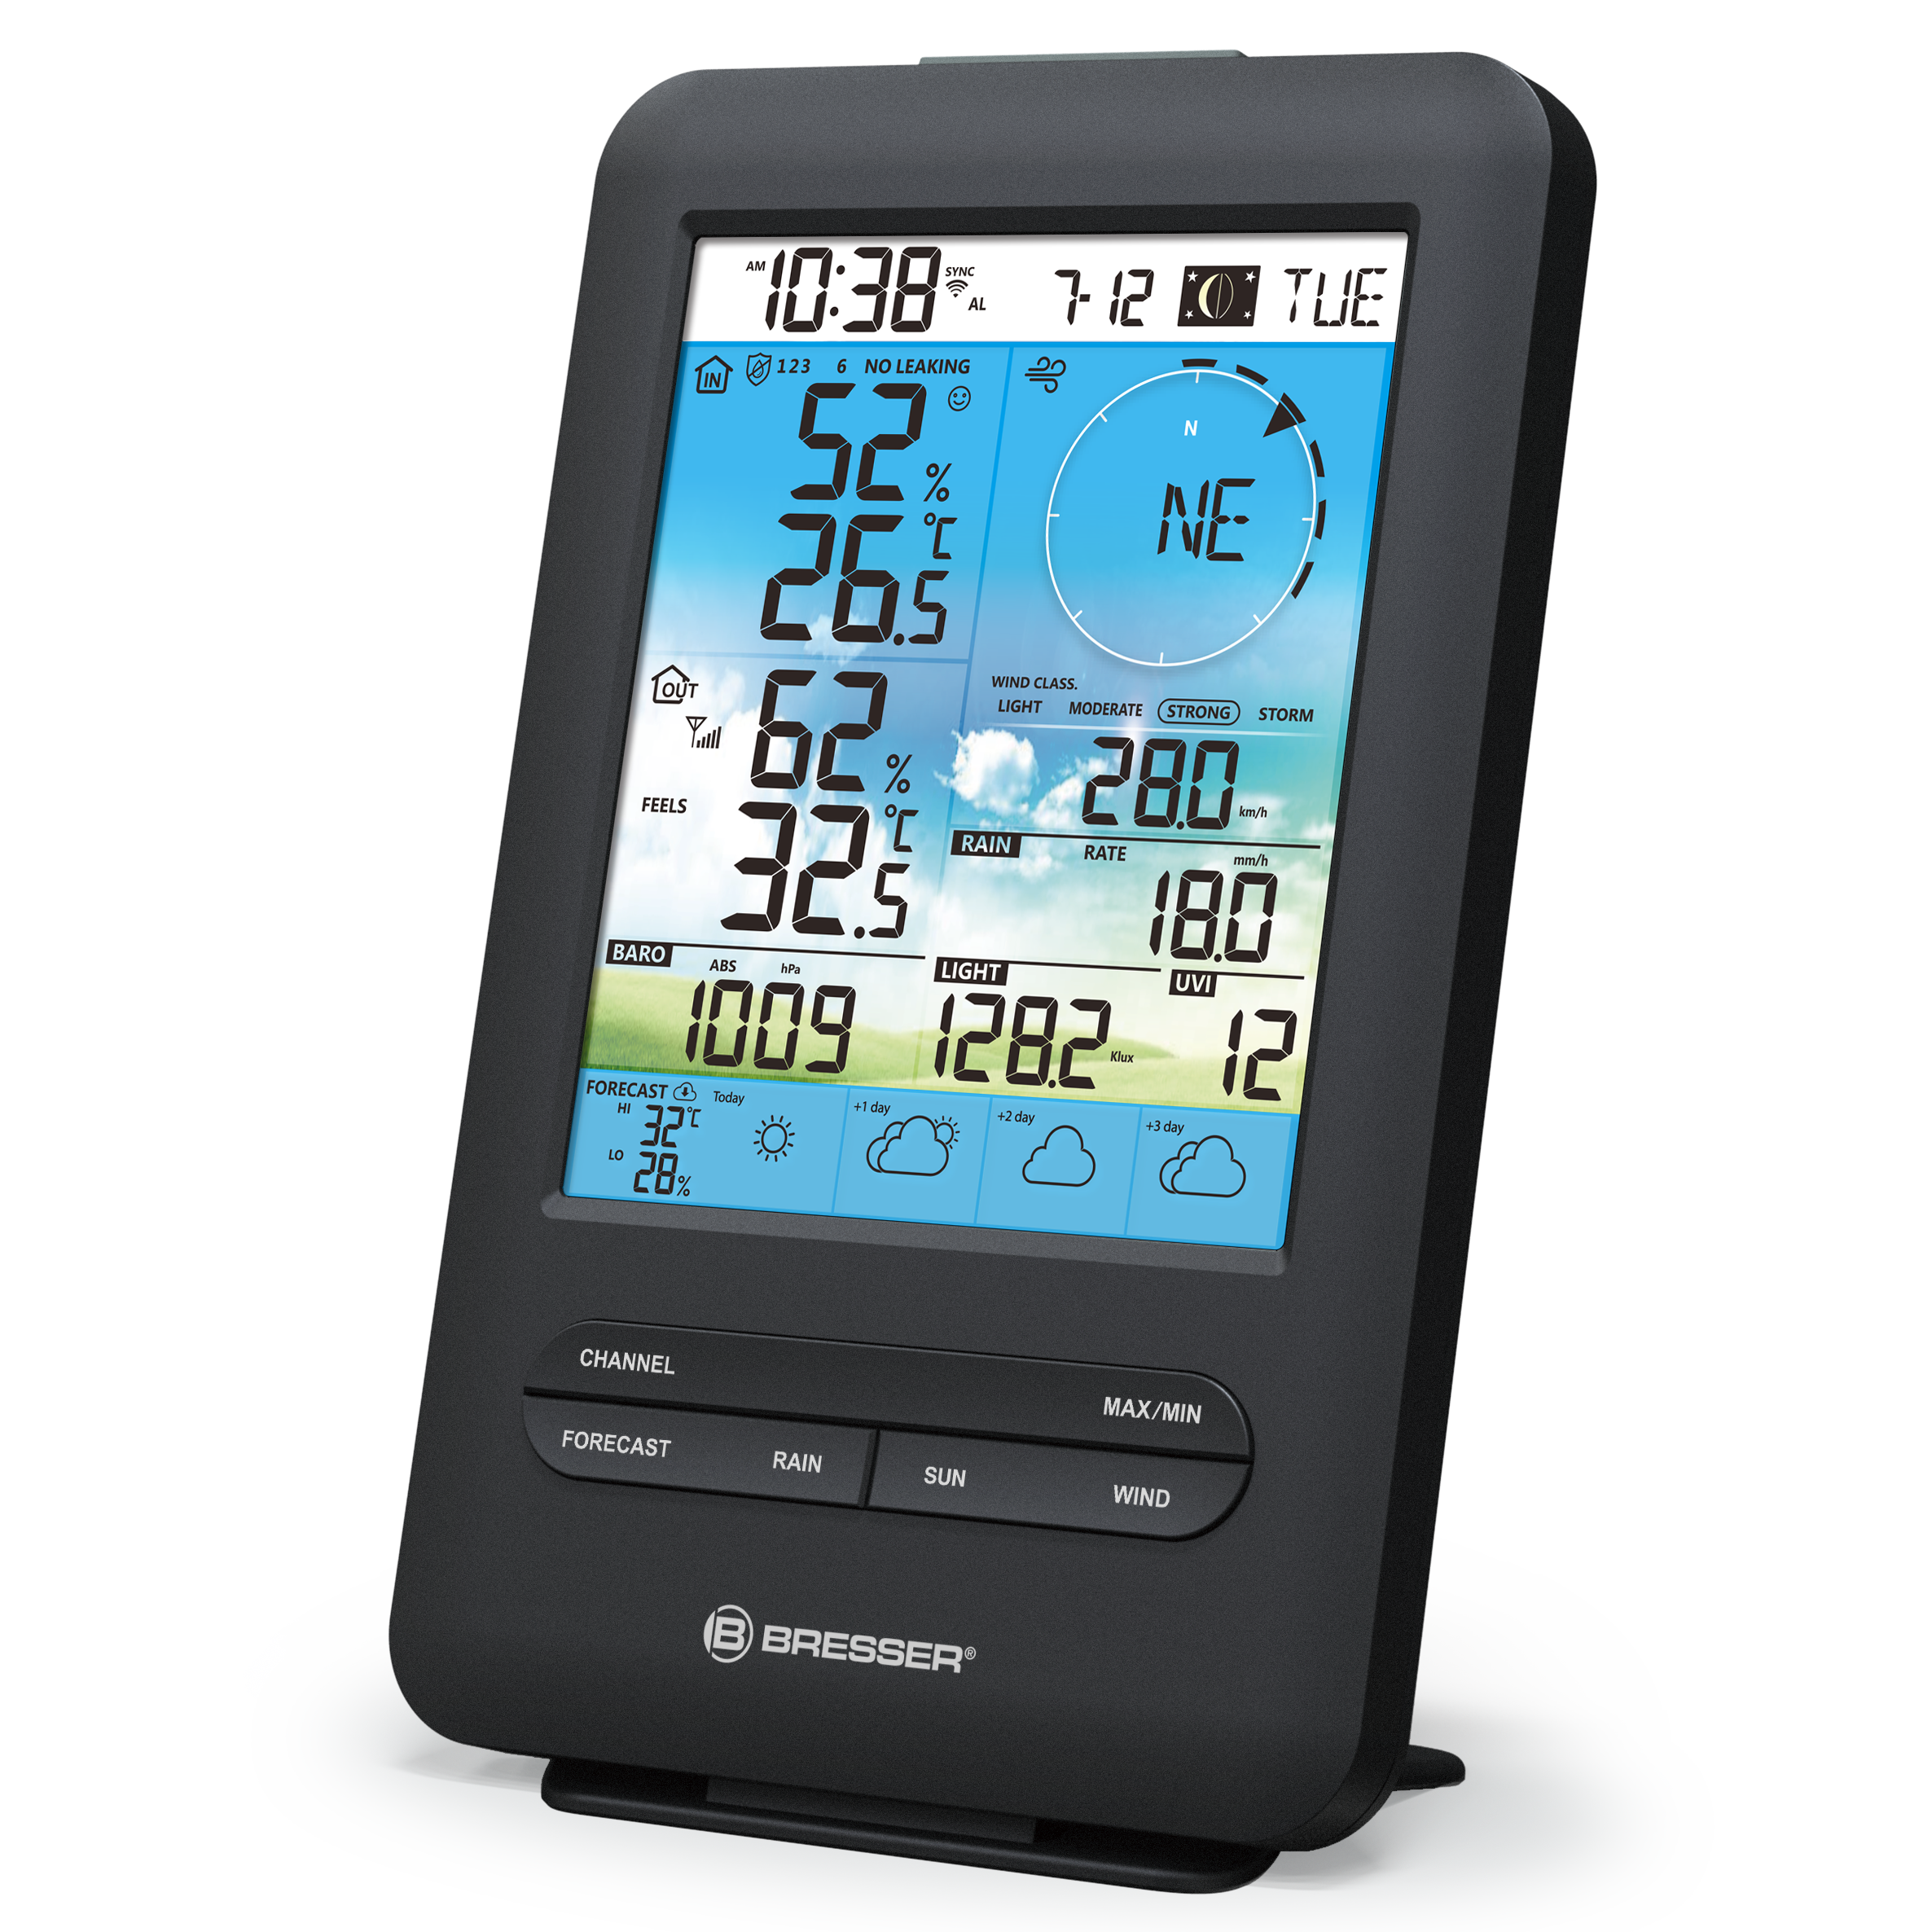 BRESSER additional base station for the 7003200 4-day 4CAST Wi-Fi weather centre (Refurbished)